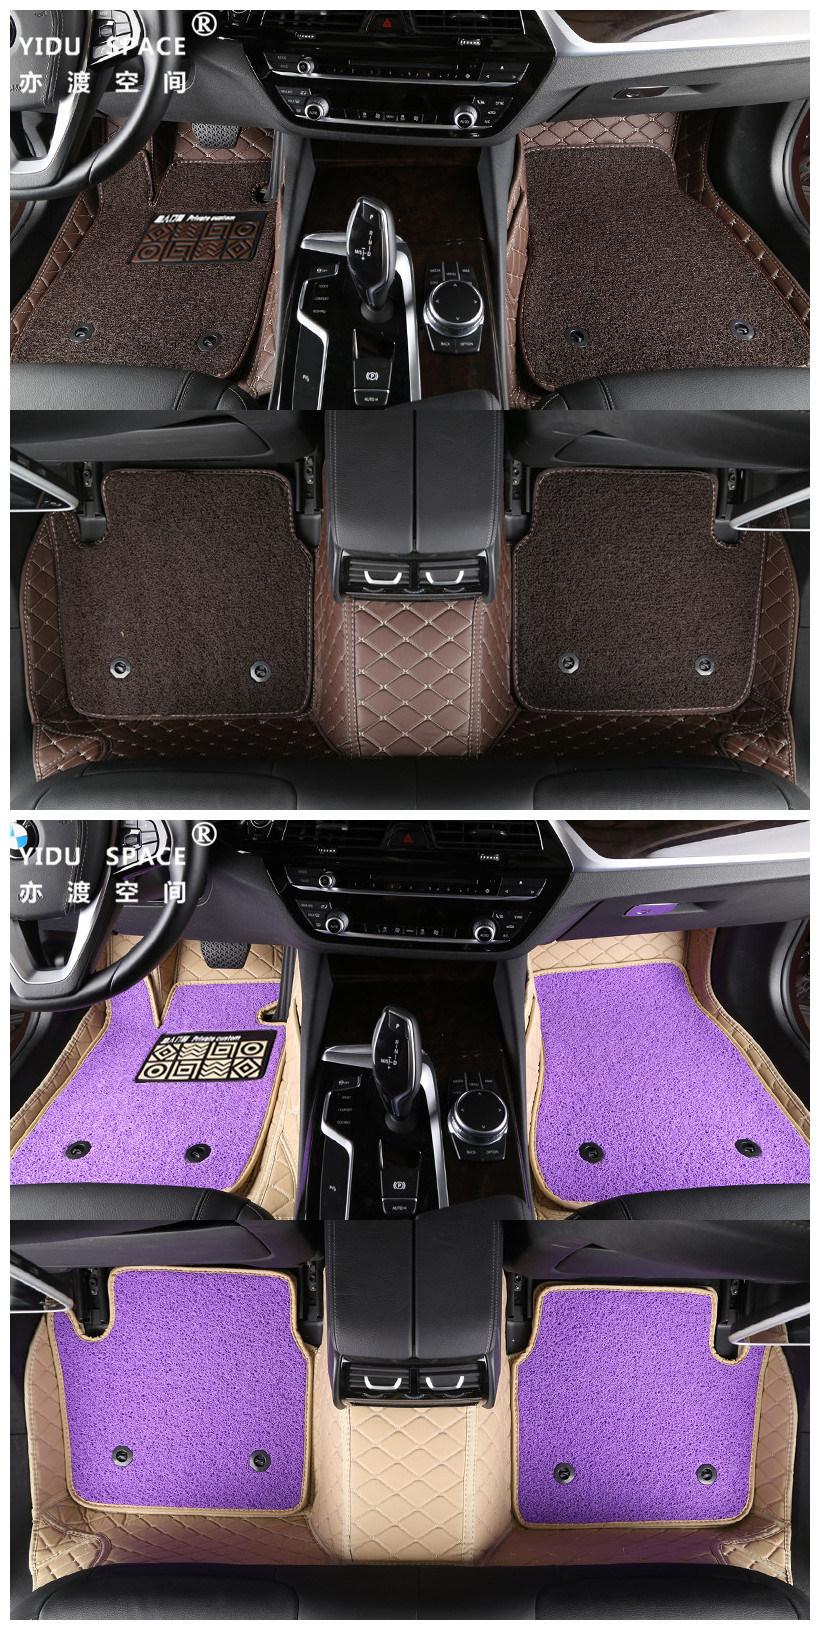 Car Accessory Hand Sewing Leather Coil 5D Anti-Slip Car Mats